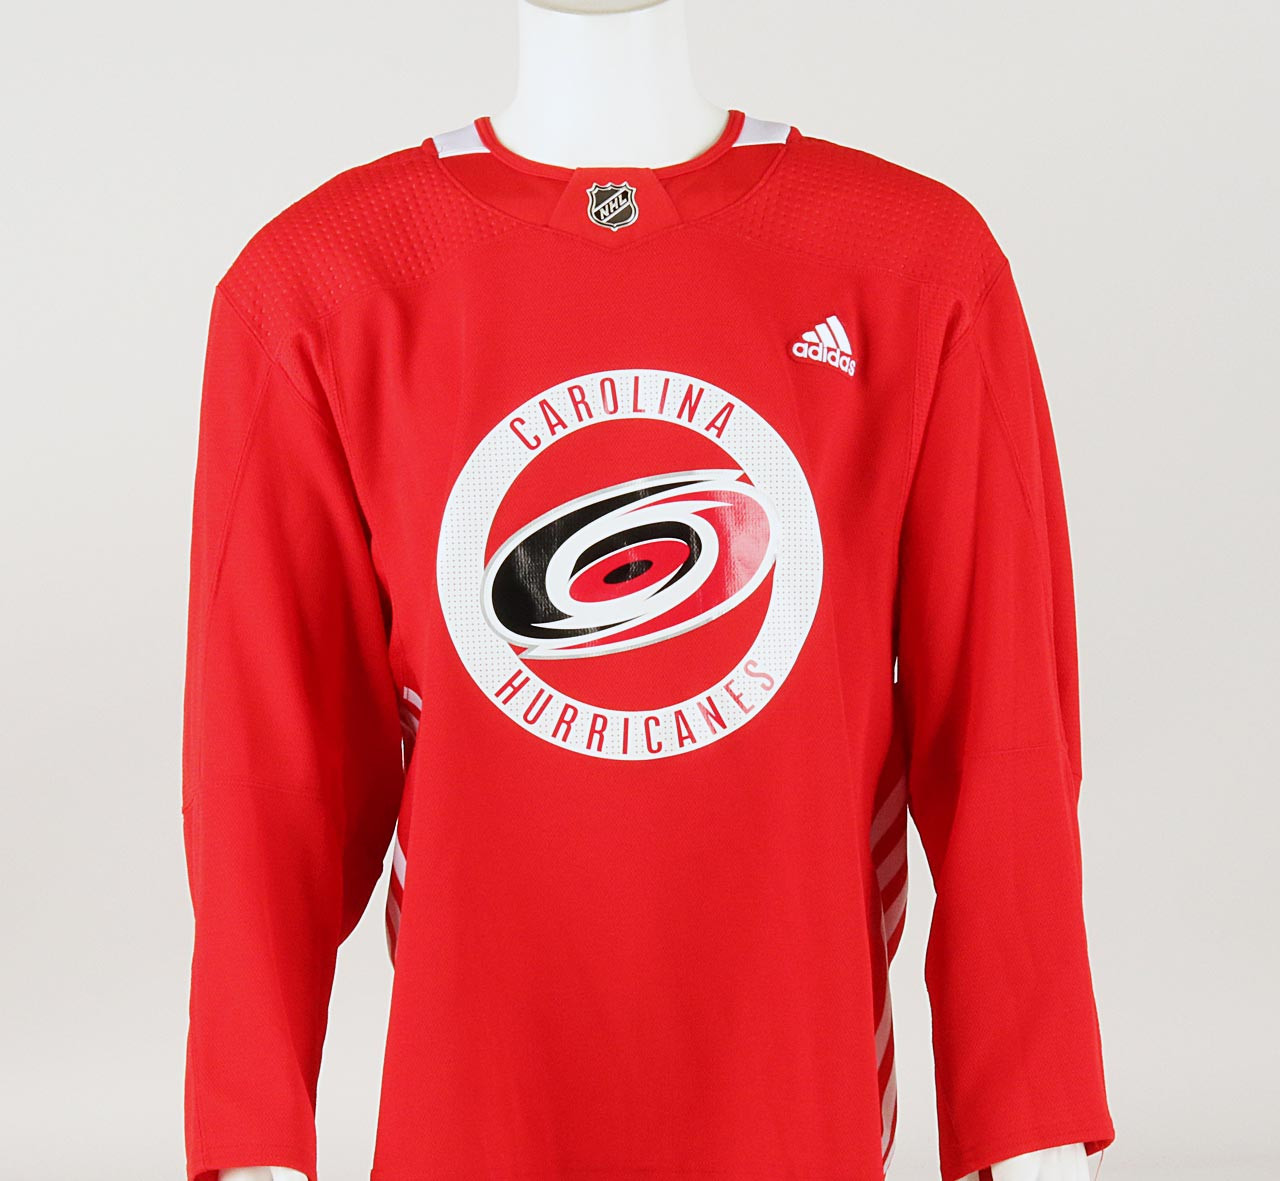 Hurricanes red jersey